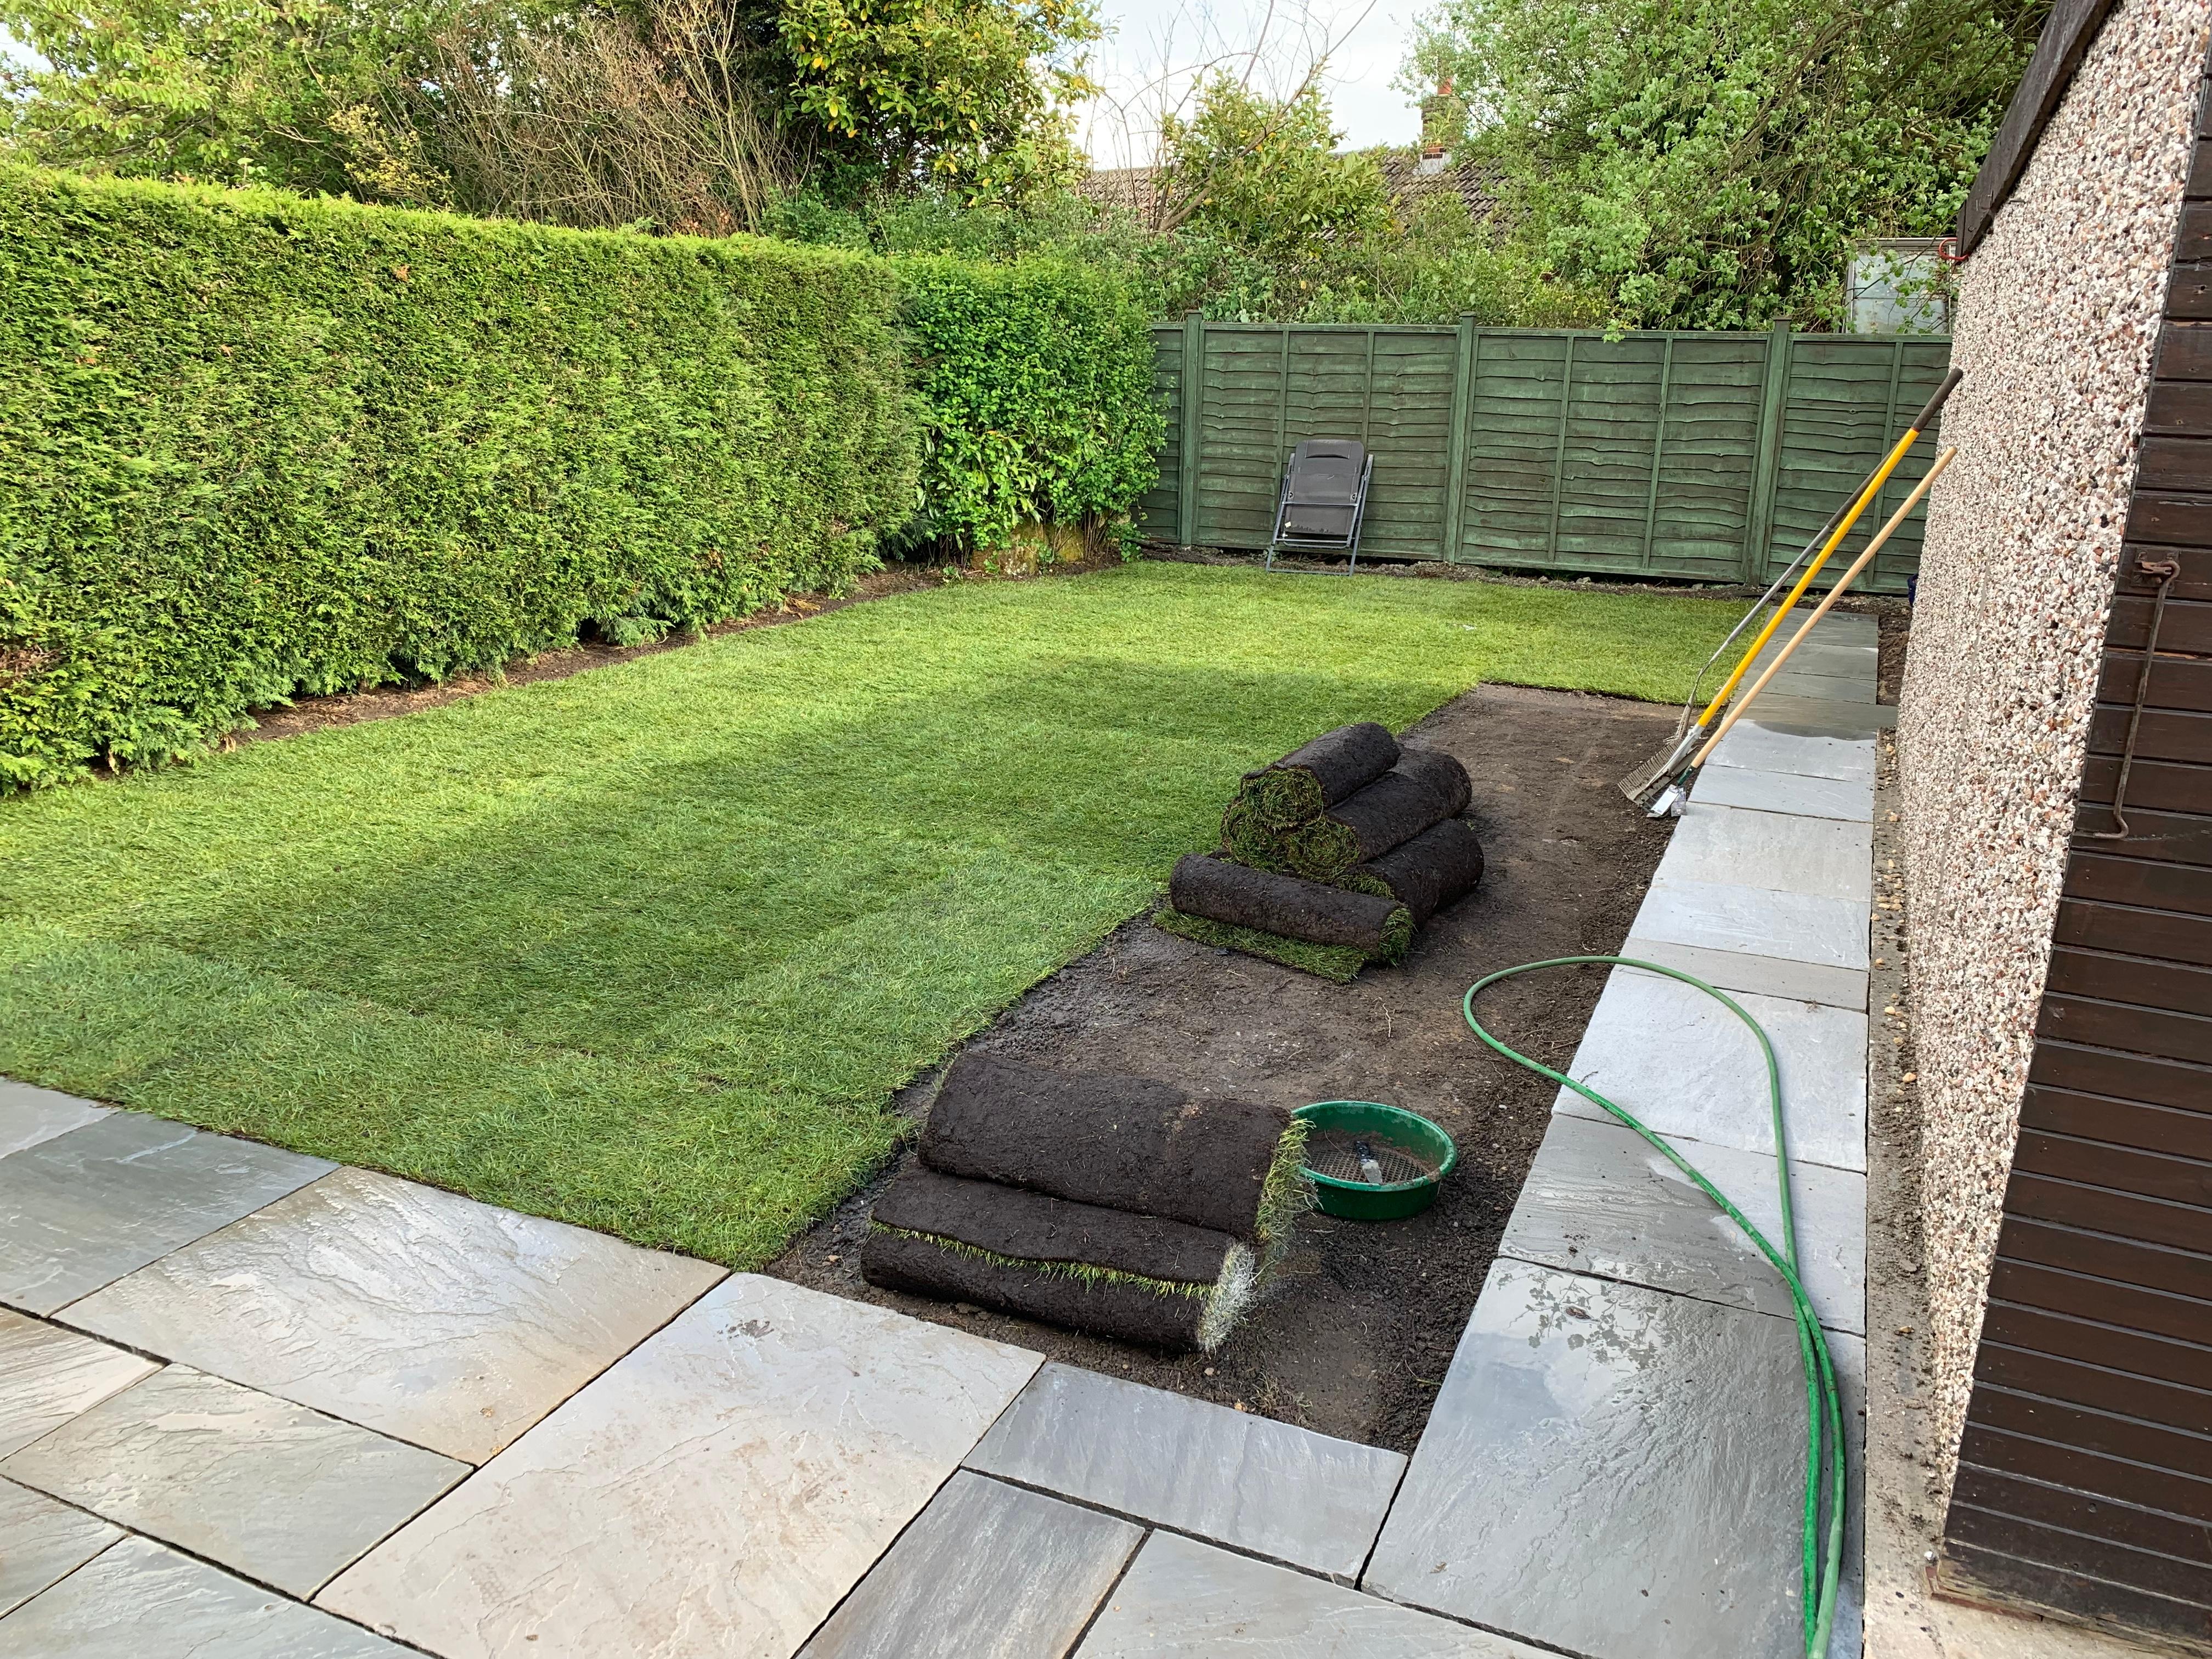 How to Level the Garden for Artificial Grass